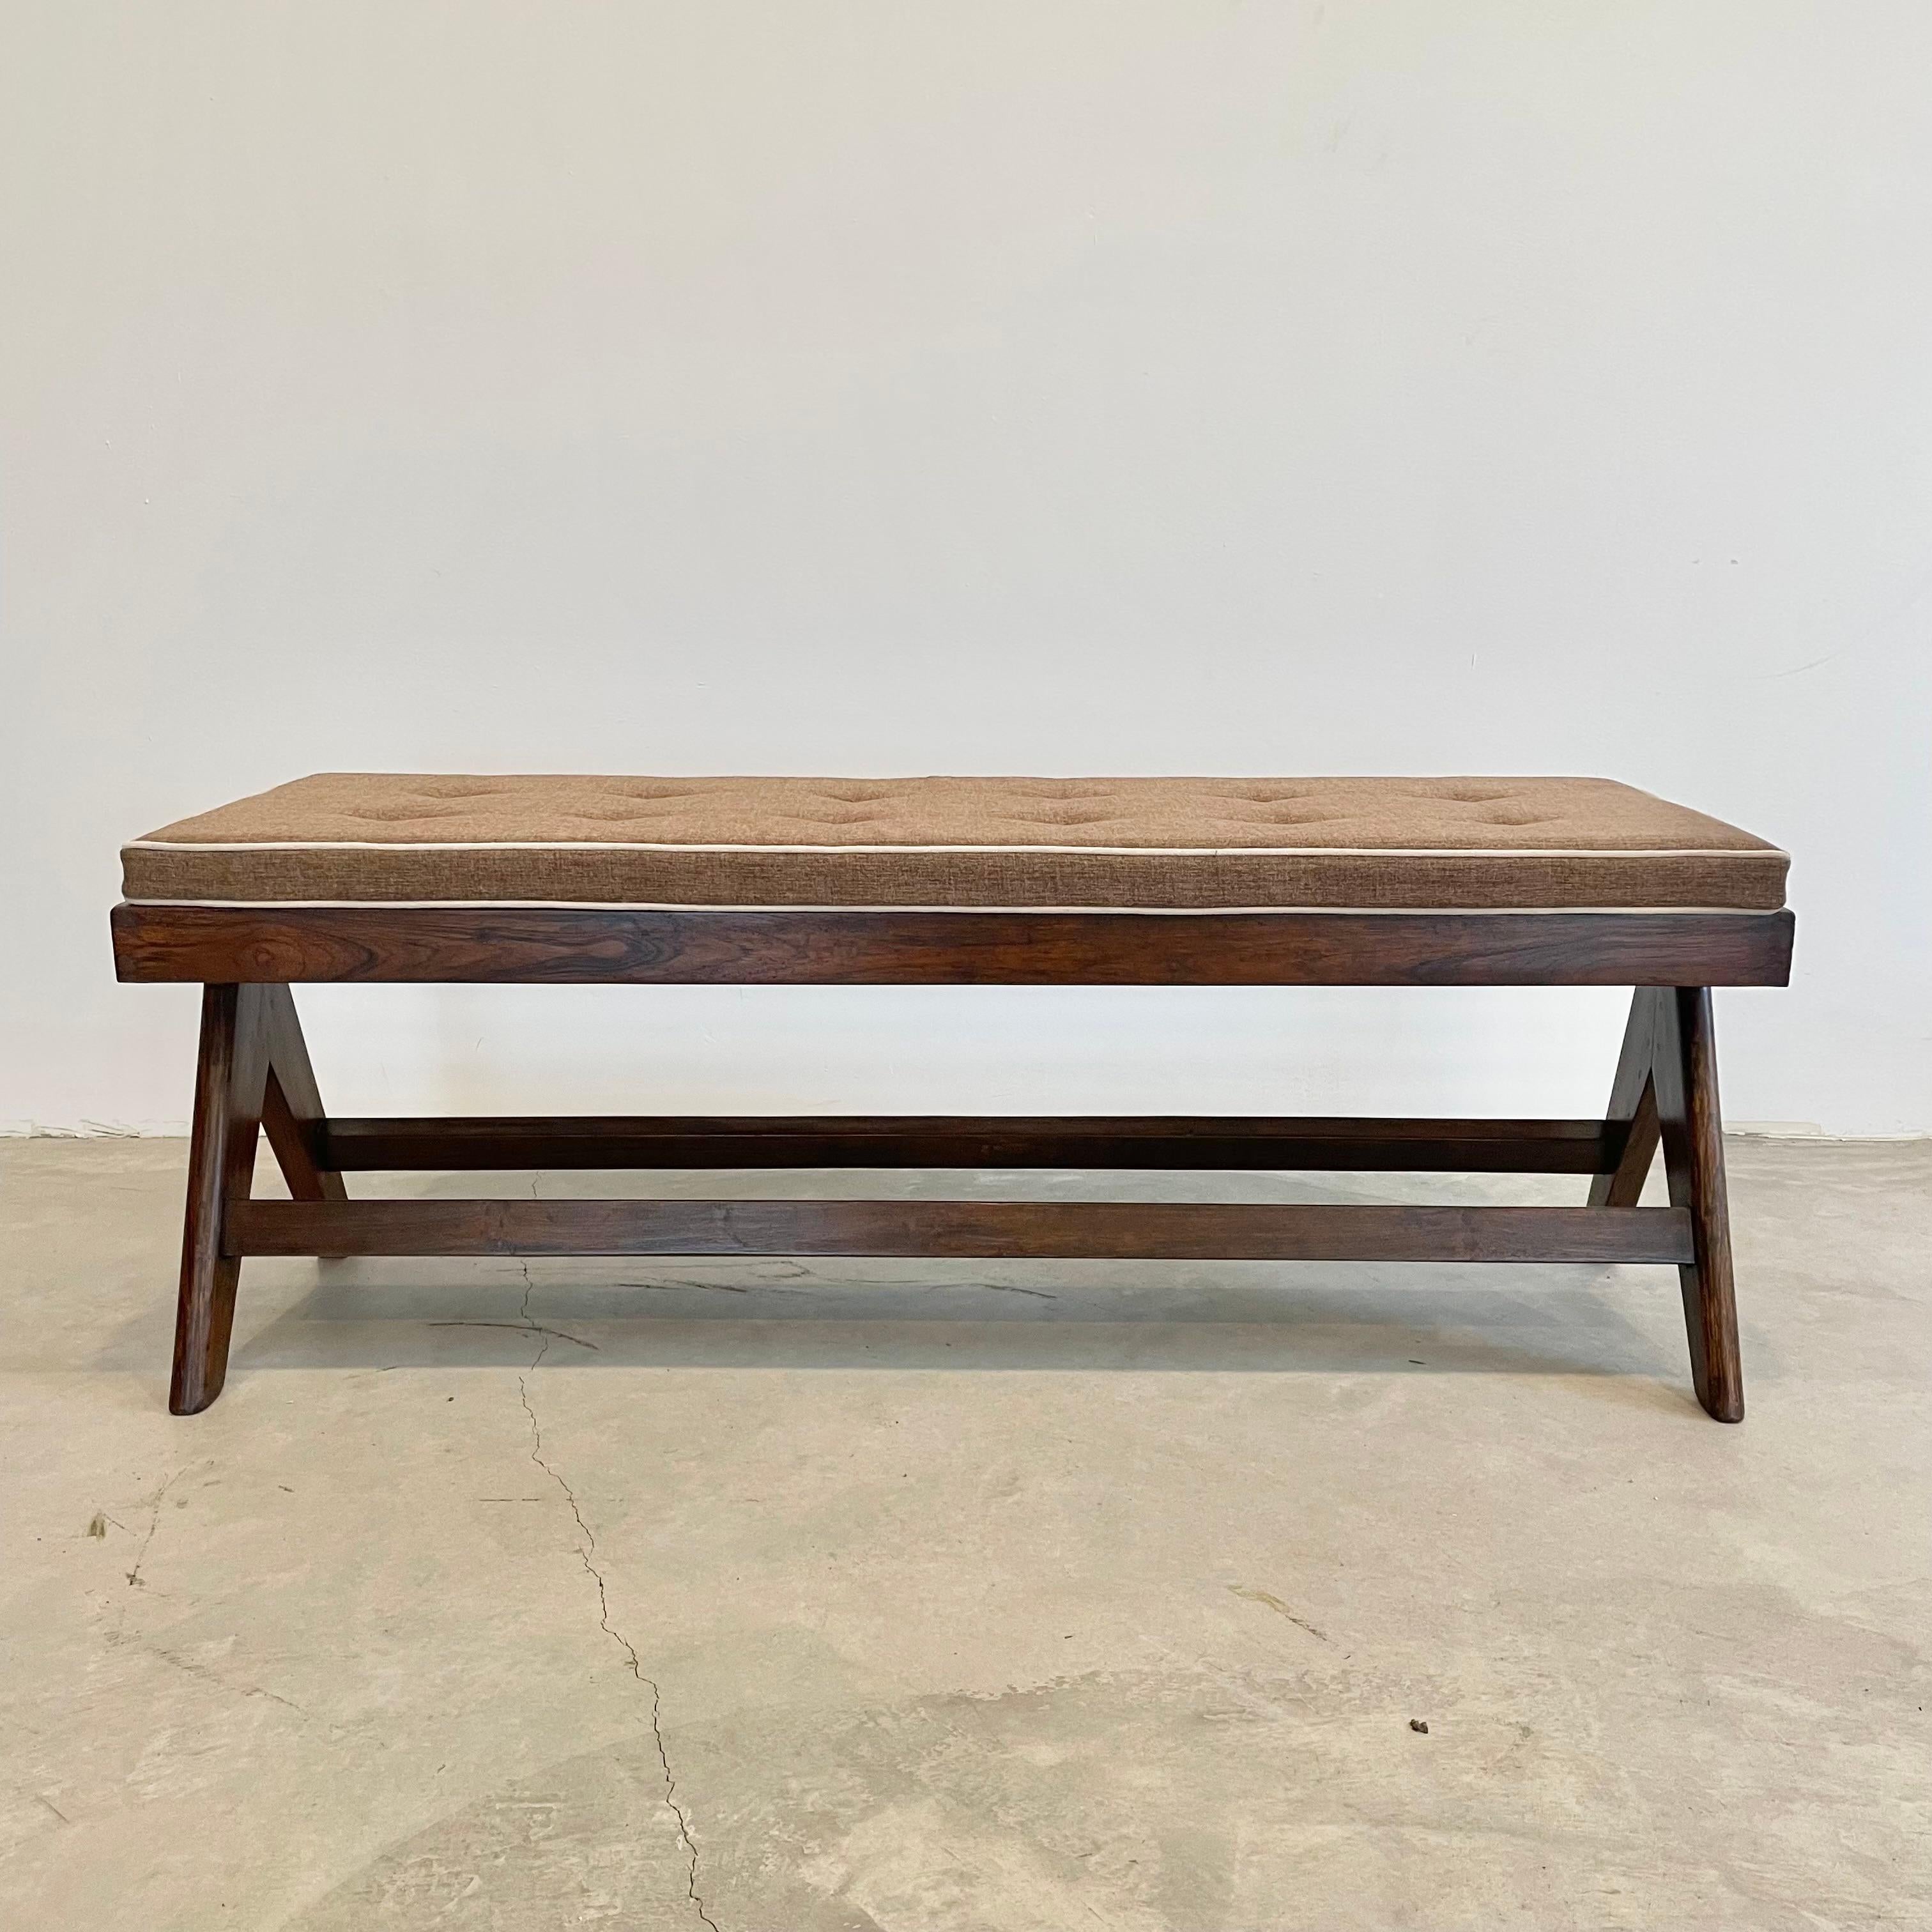 Stunning solid teak bench designed by Pierre Jeanneret for Chandigargh. Stencil reads - M.L.A.(GH)-036. Rectangular seat resting on two compass type side legs. Connected by a crossbar connecting each leg to its opposite. New caning. New cushion.